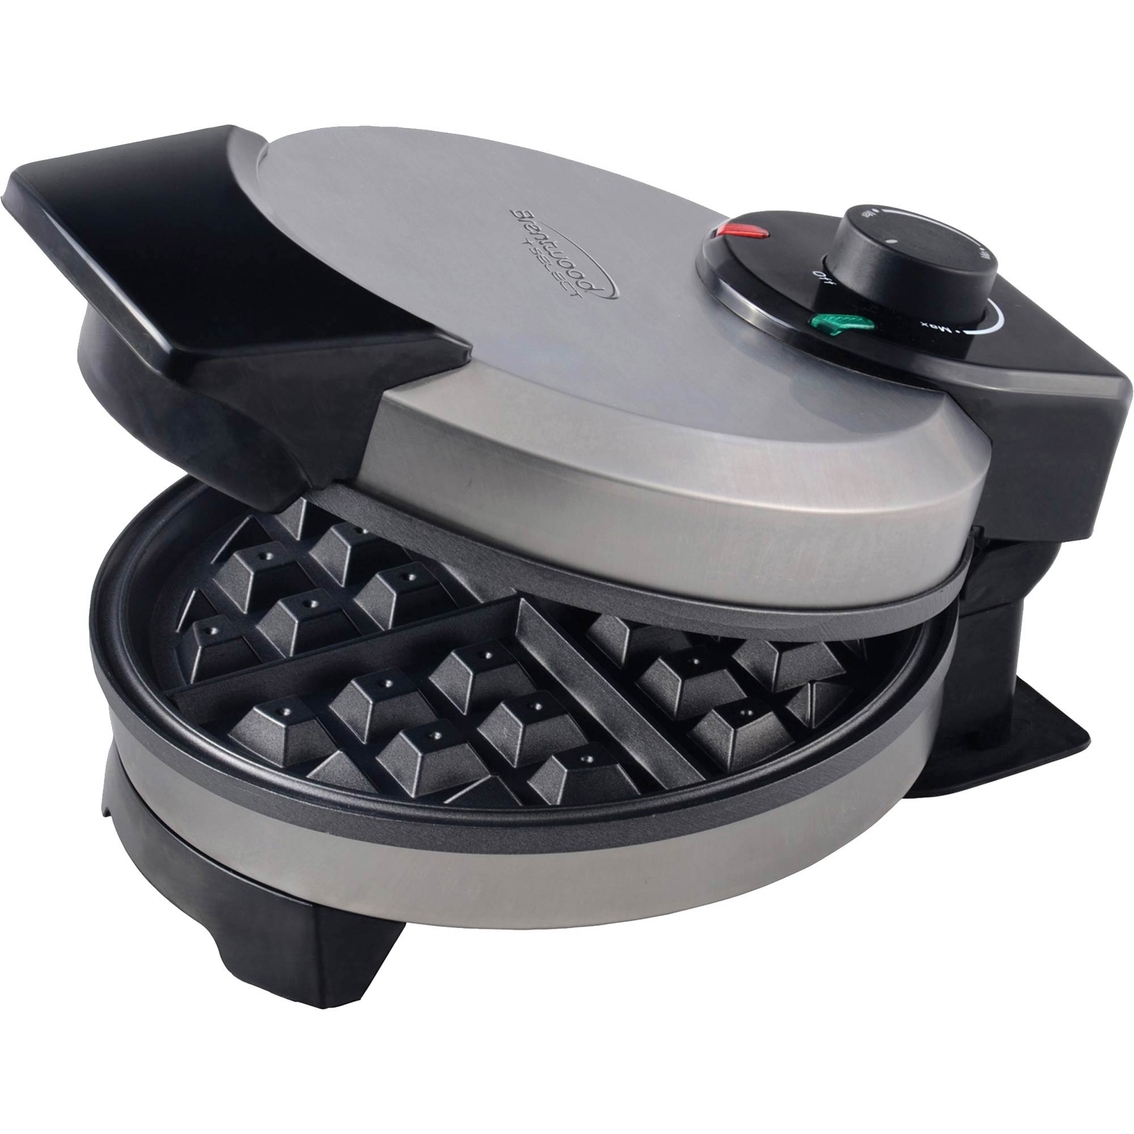 Brentwood 7 in. Nonstick Belgian Waffle Maker - Image 2 of 4